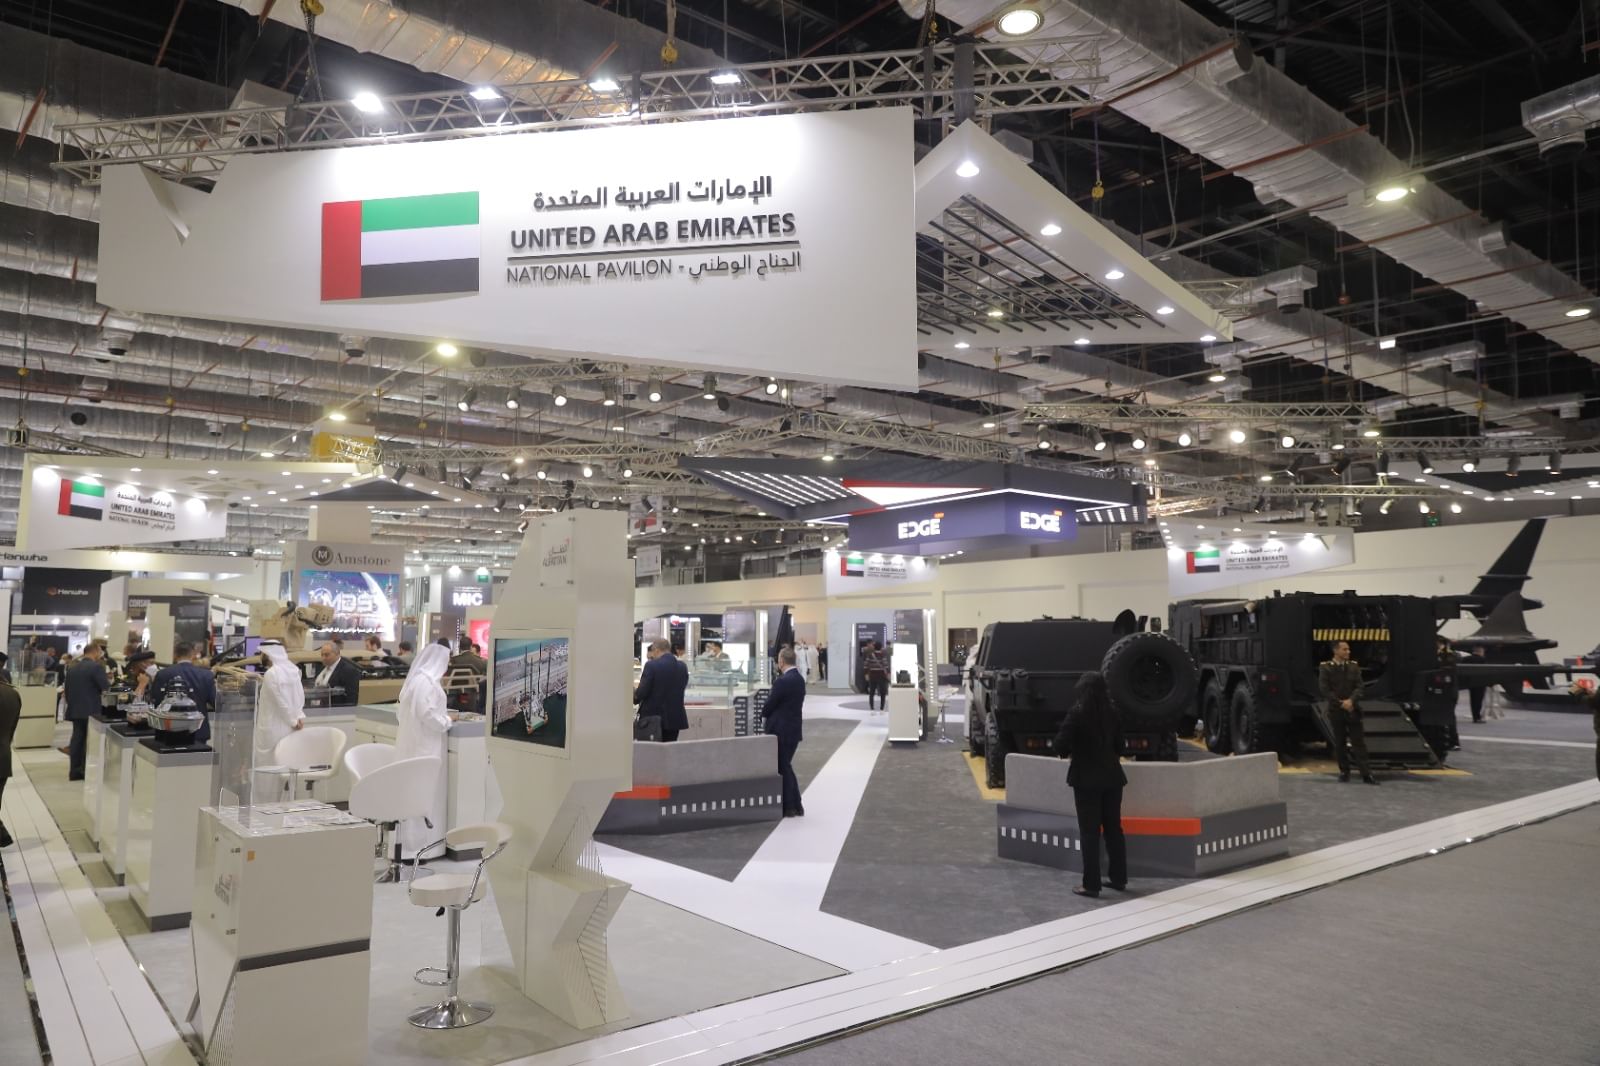 UAE National Pavilion showcases over 150 defense products at ‘World Defense Show’ in Saudi Arabia